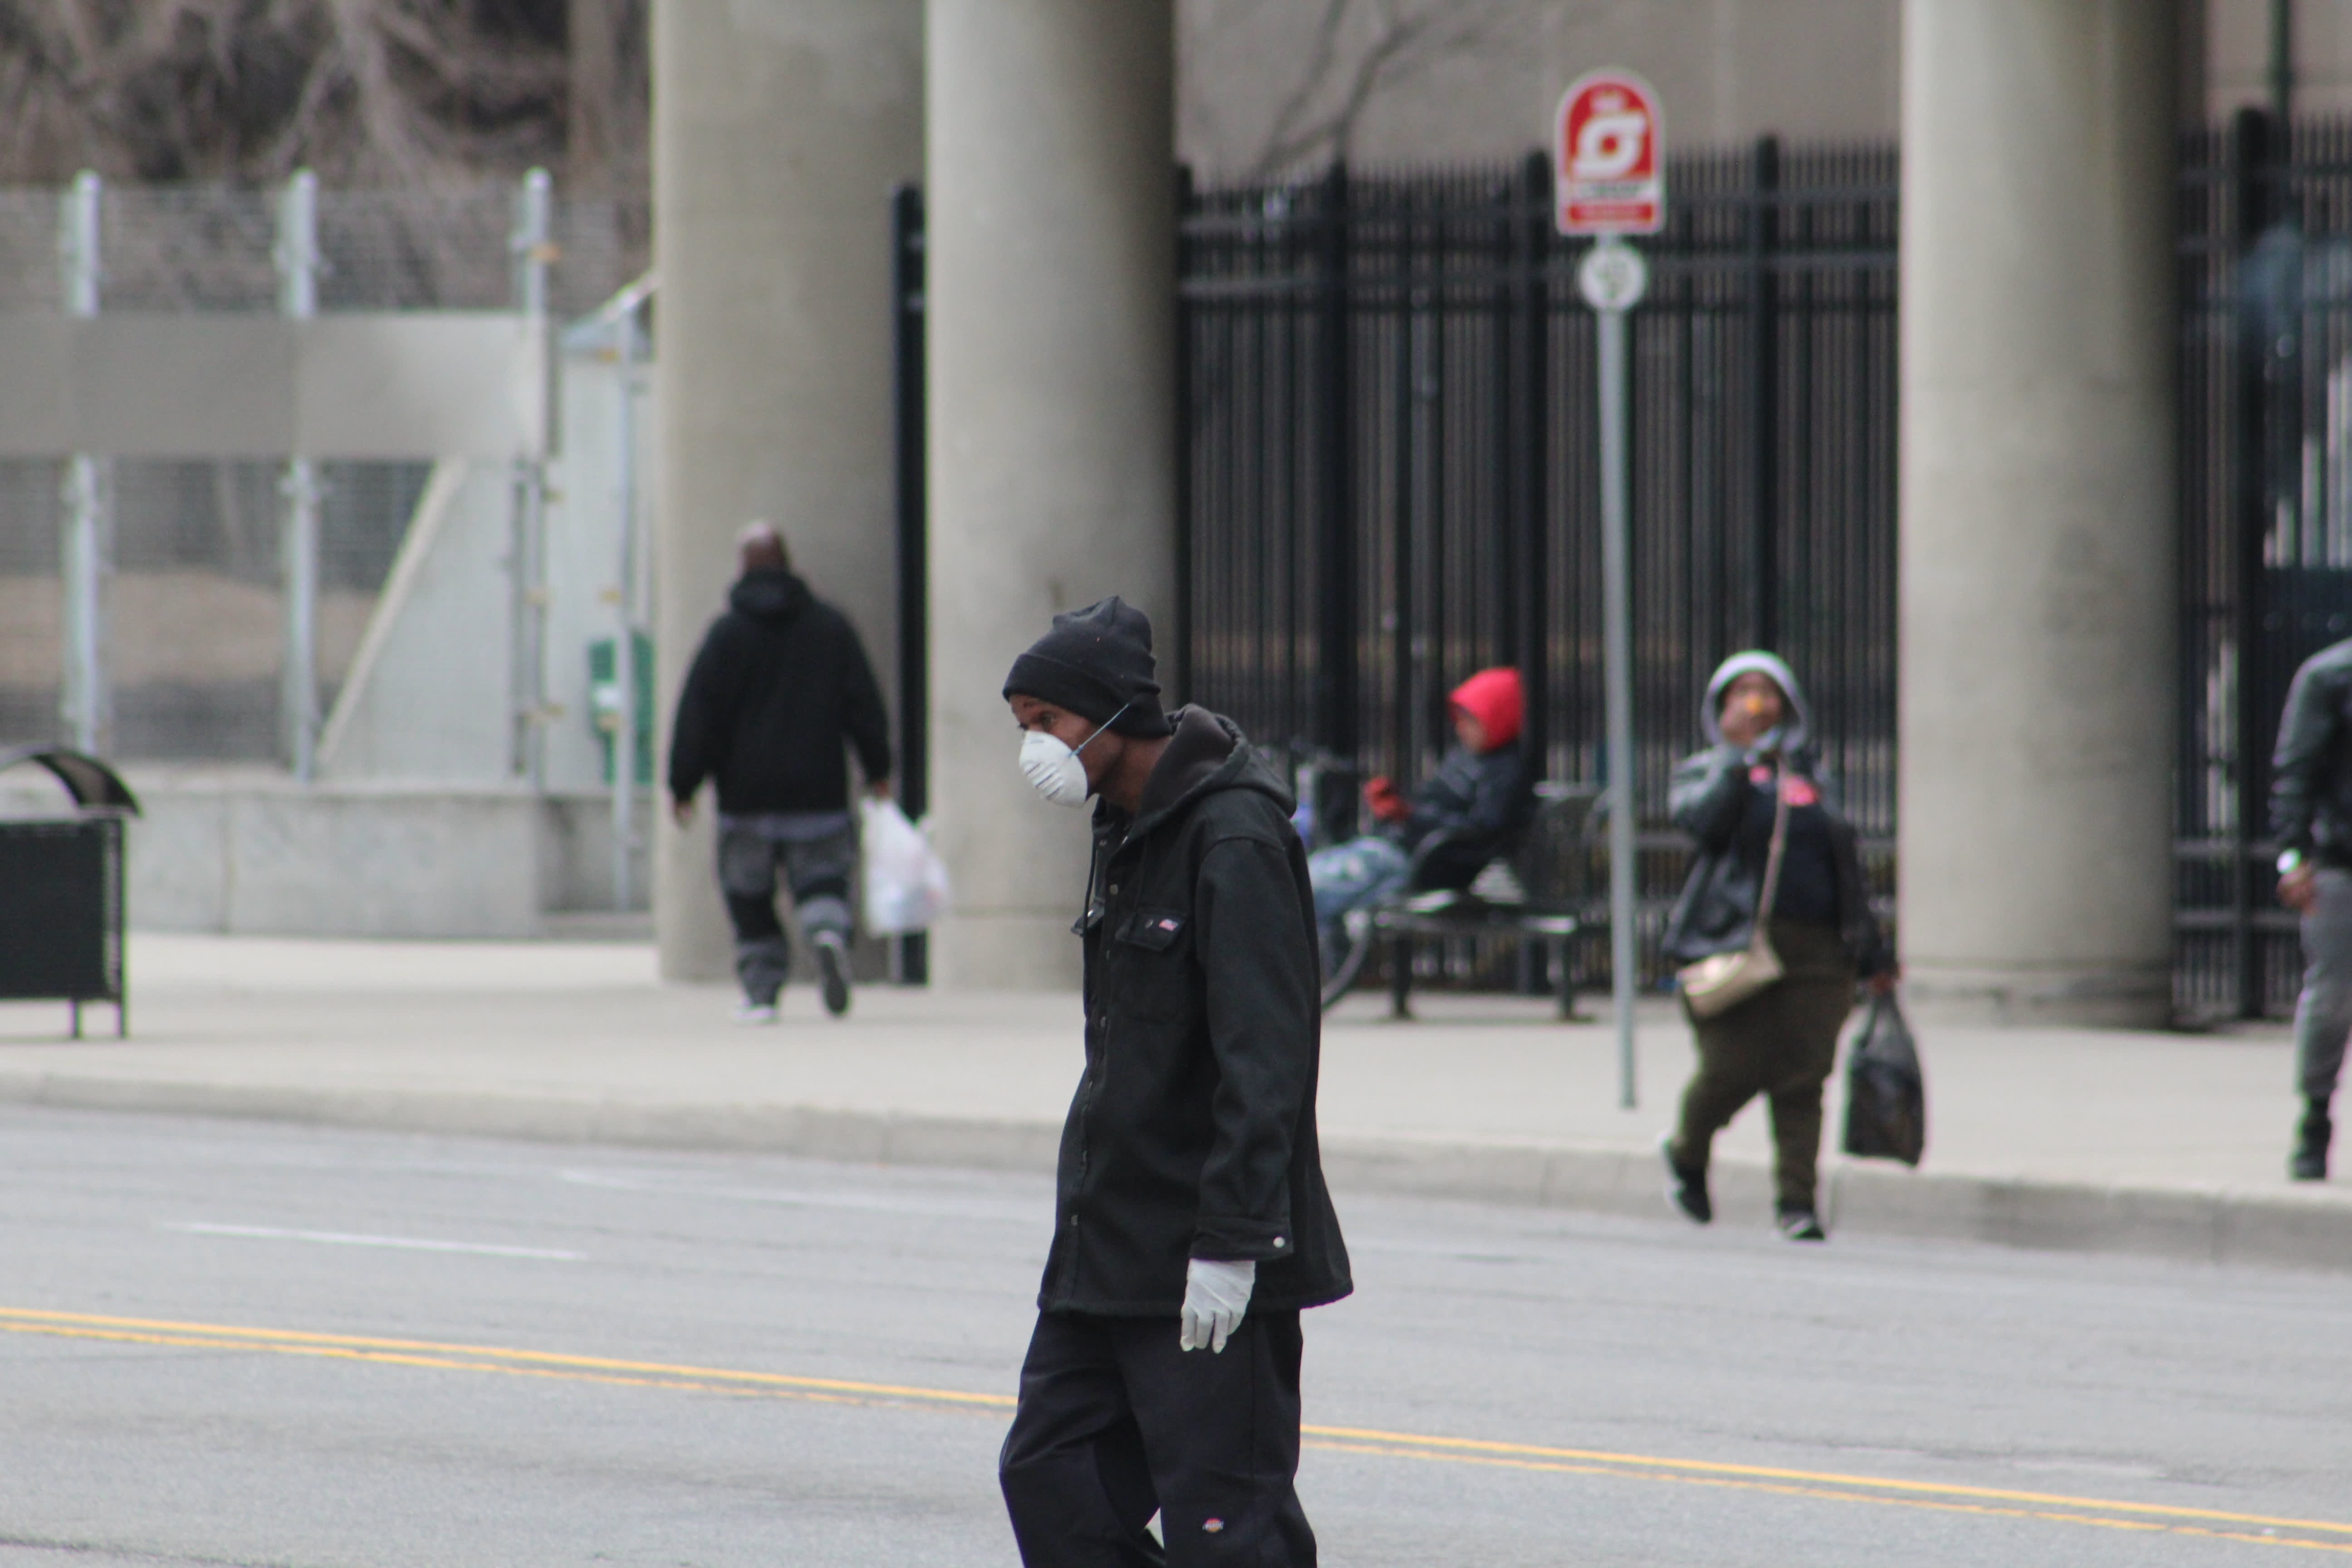 As the coronavirus takes hold in Detroit, pandemic magnifies city's poverty, racial disparities